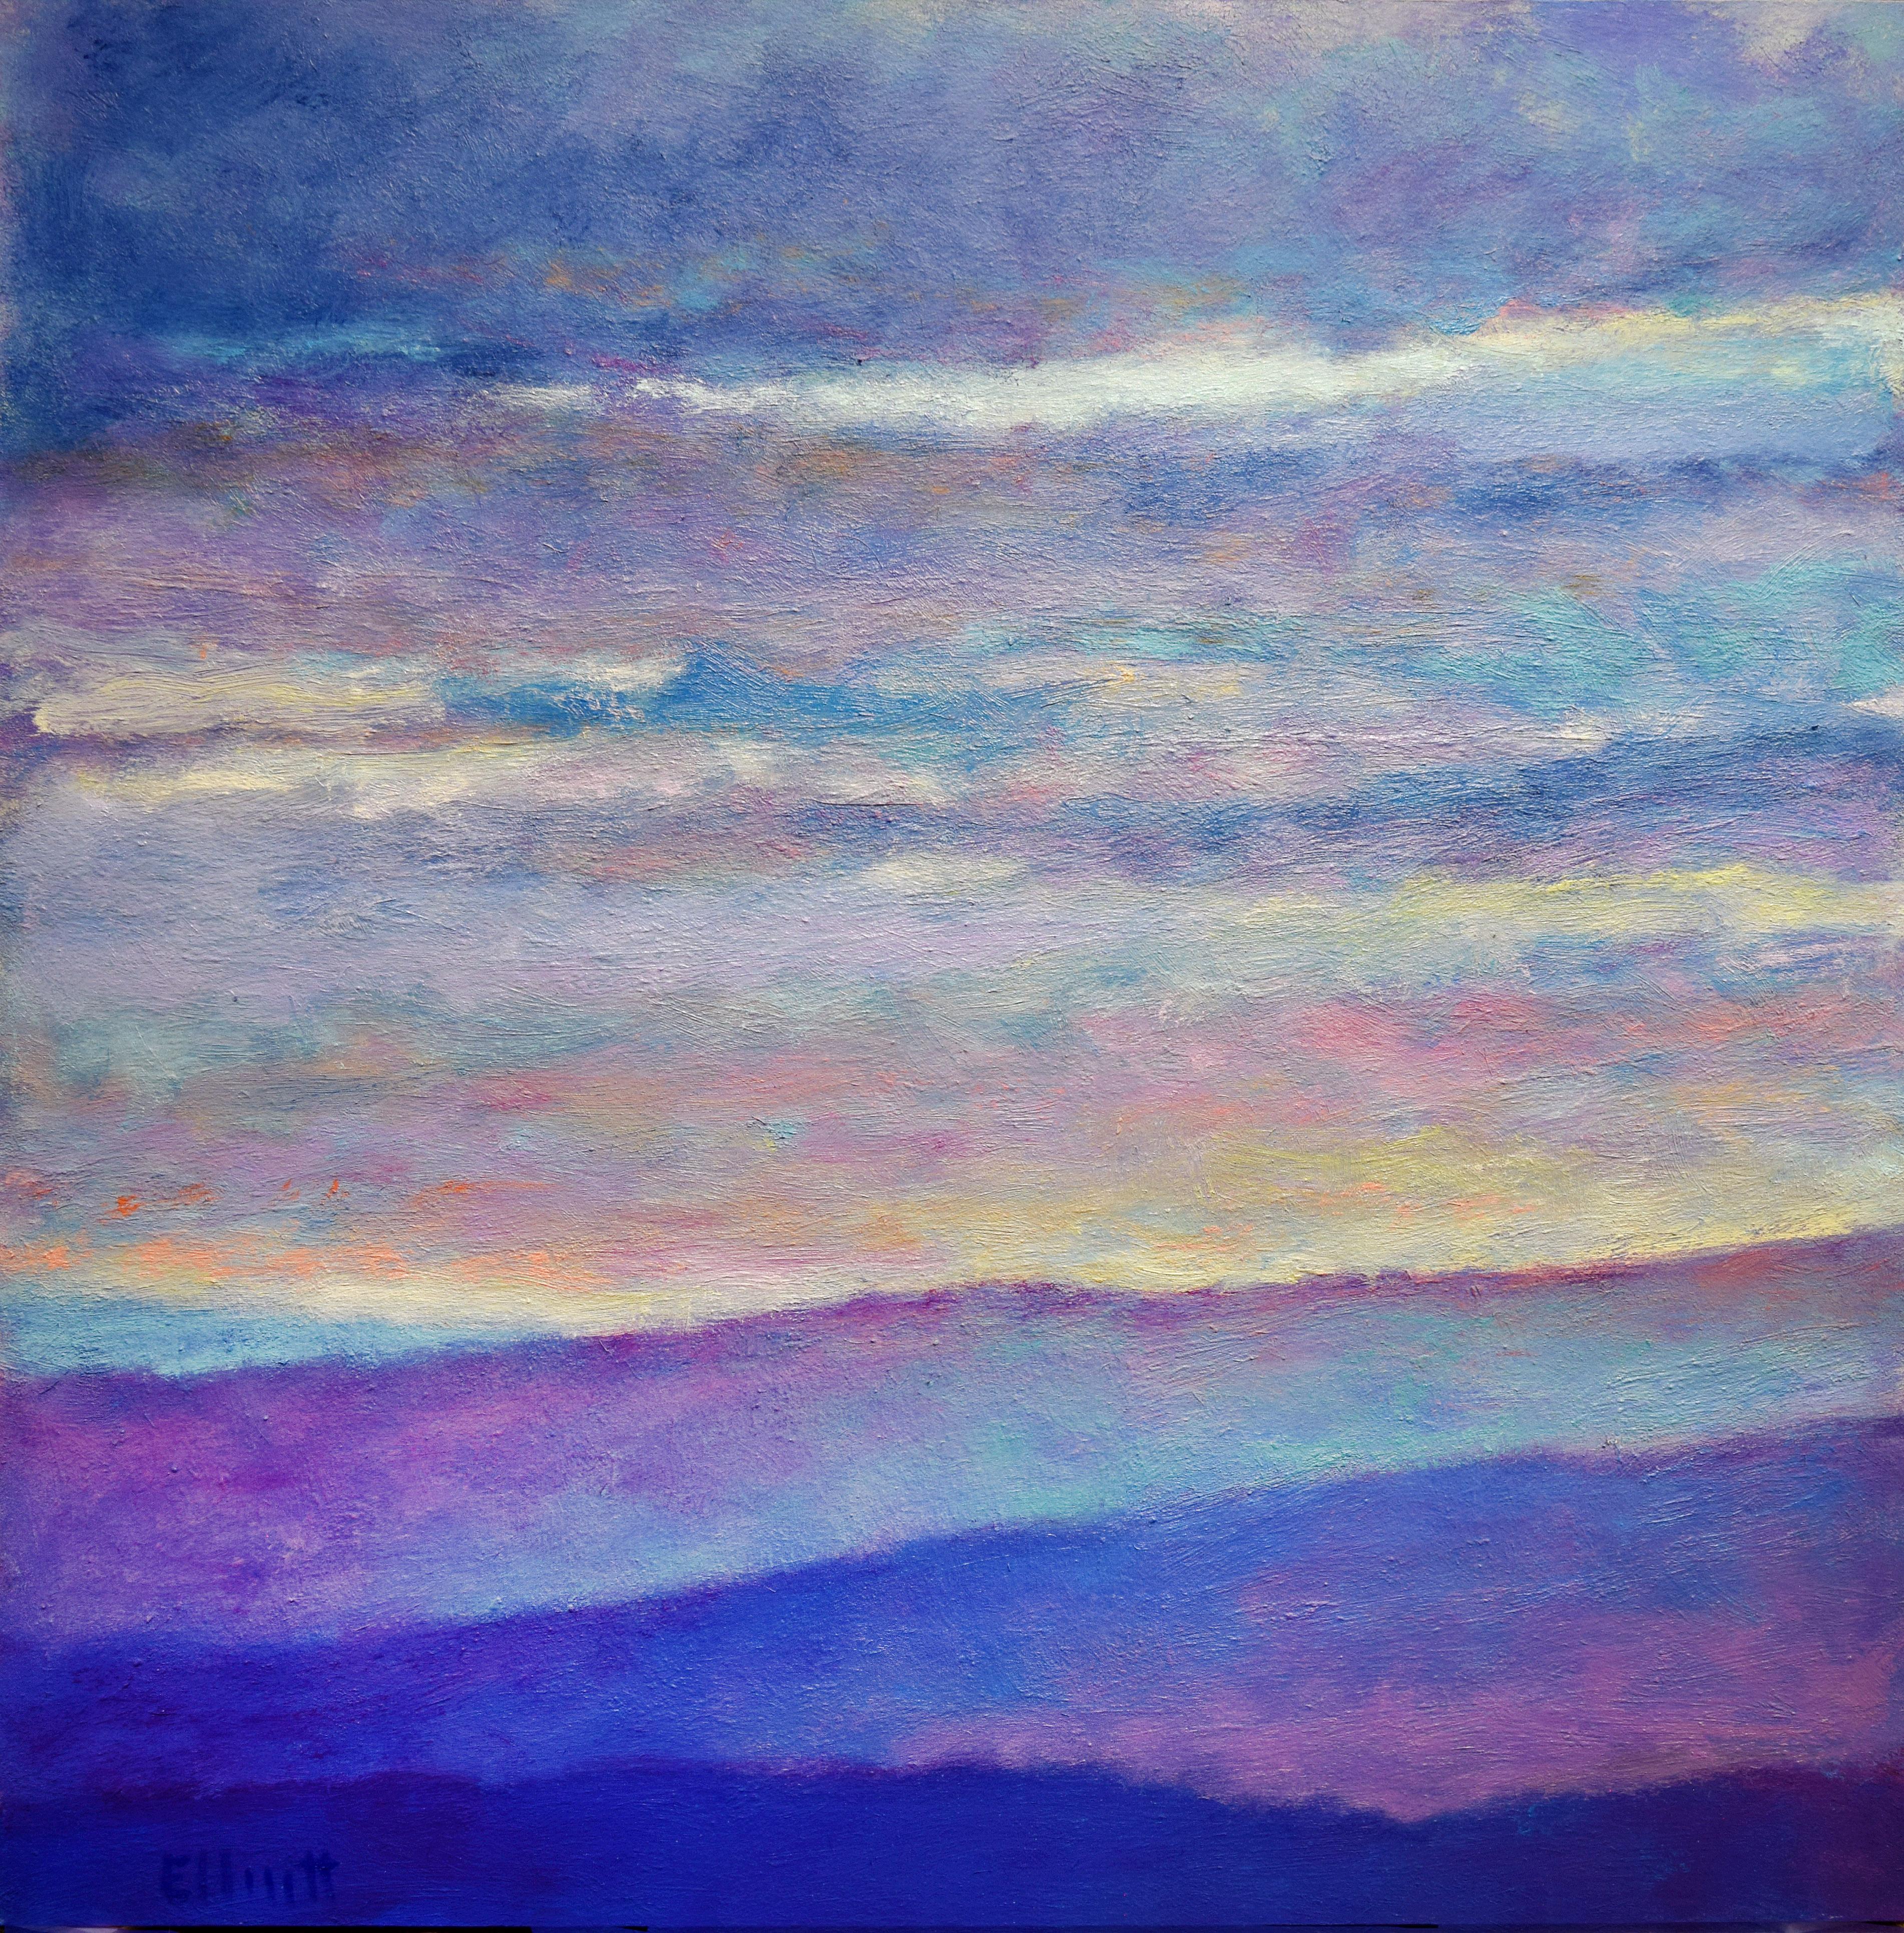 This contemporary abstract landscape painting by Ken Elliott is made with oil paint on canvas. It features a cool blue and violet palette, capturing rolling hills underneath thick, hazy clouds, with contrasting accents of warm yellow peaking out